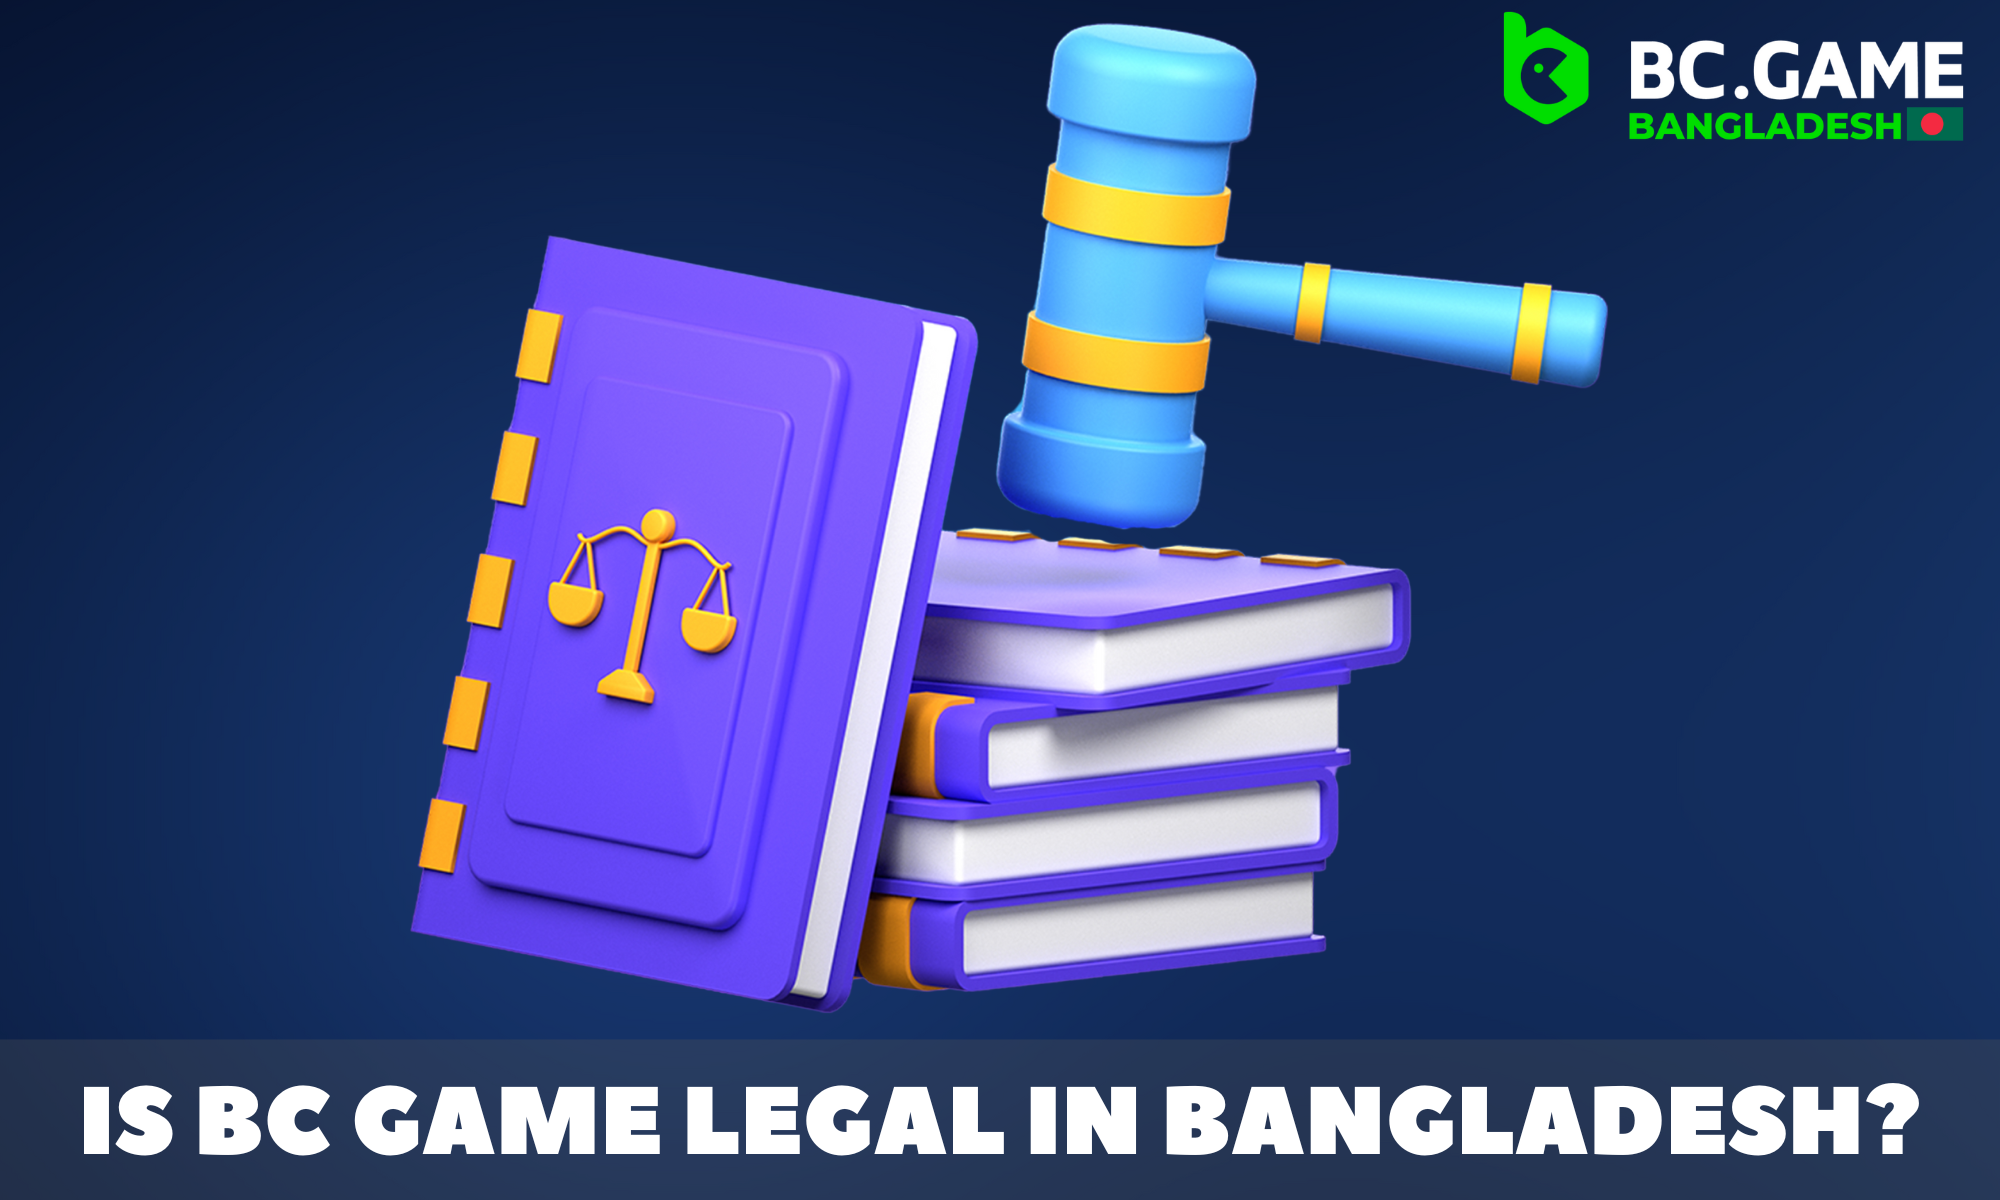 BC.Game is fully legal and operates in Bangladesh under a Curacao license